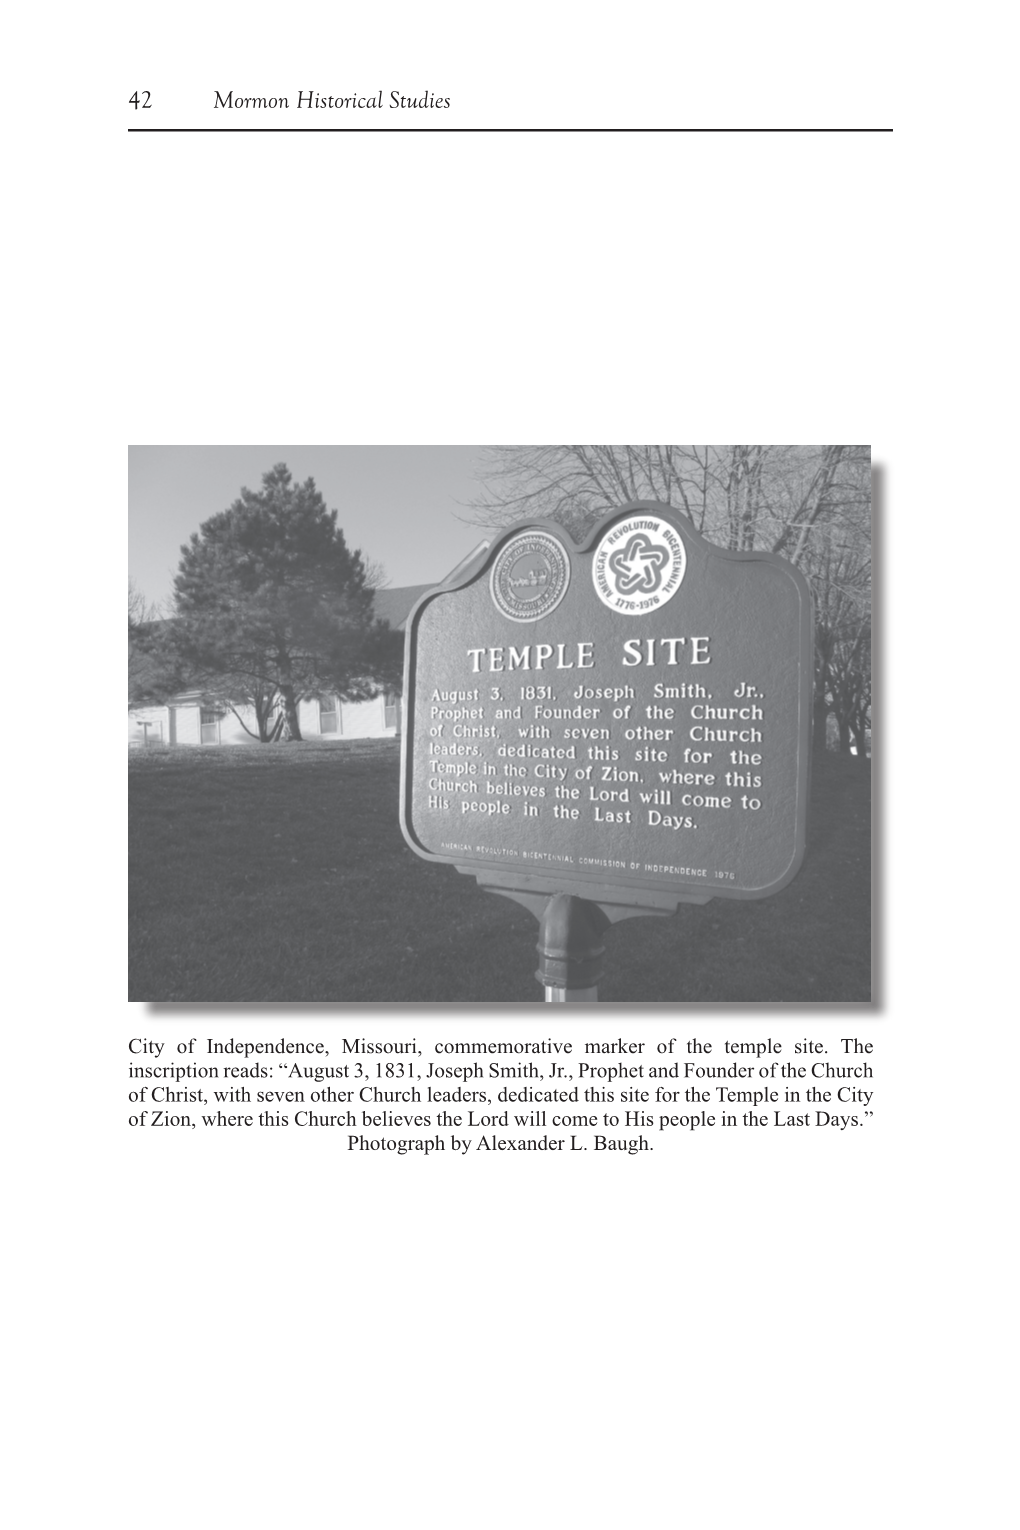 A Spot for the Temple”: Reclaiming the Temple Site in Independence, Missouri